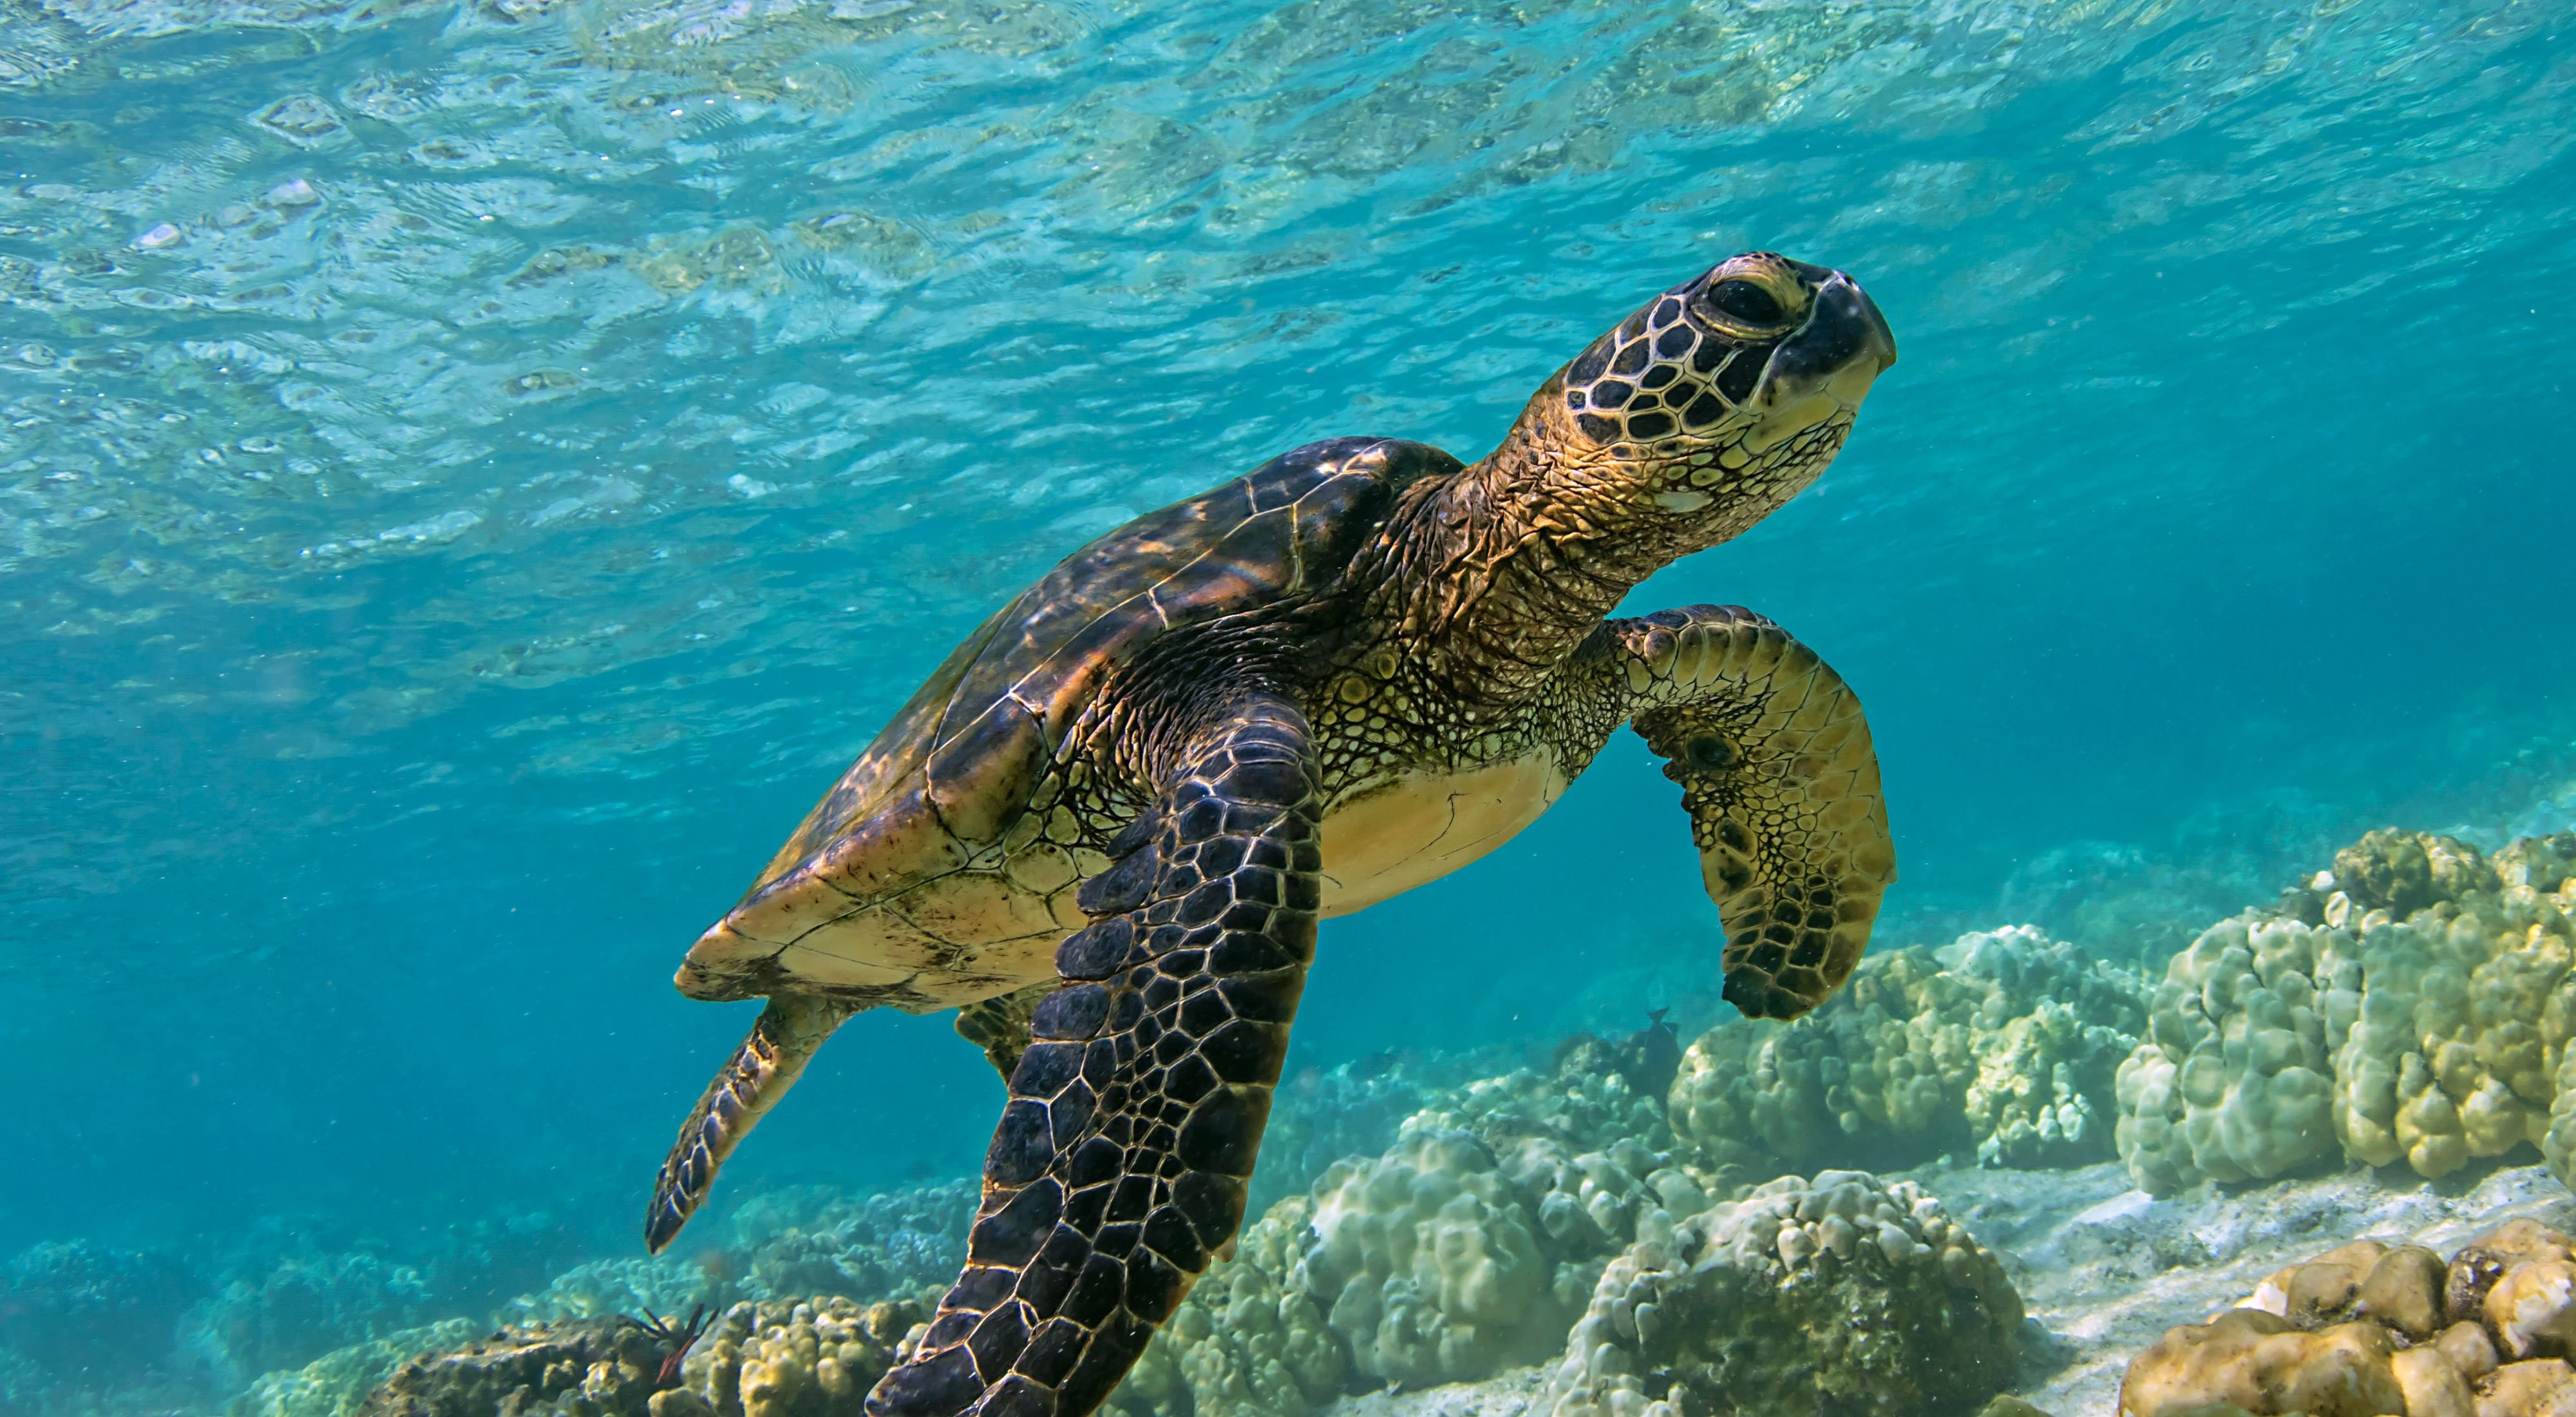 How endangered are green sea turtles?